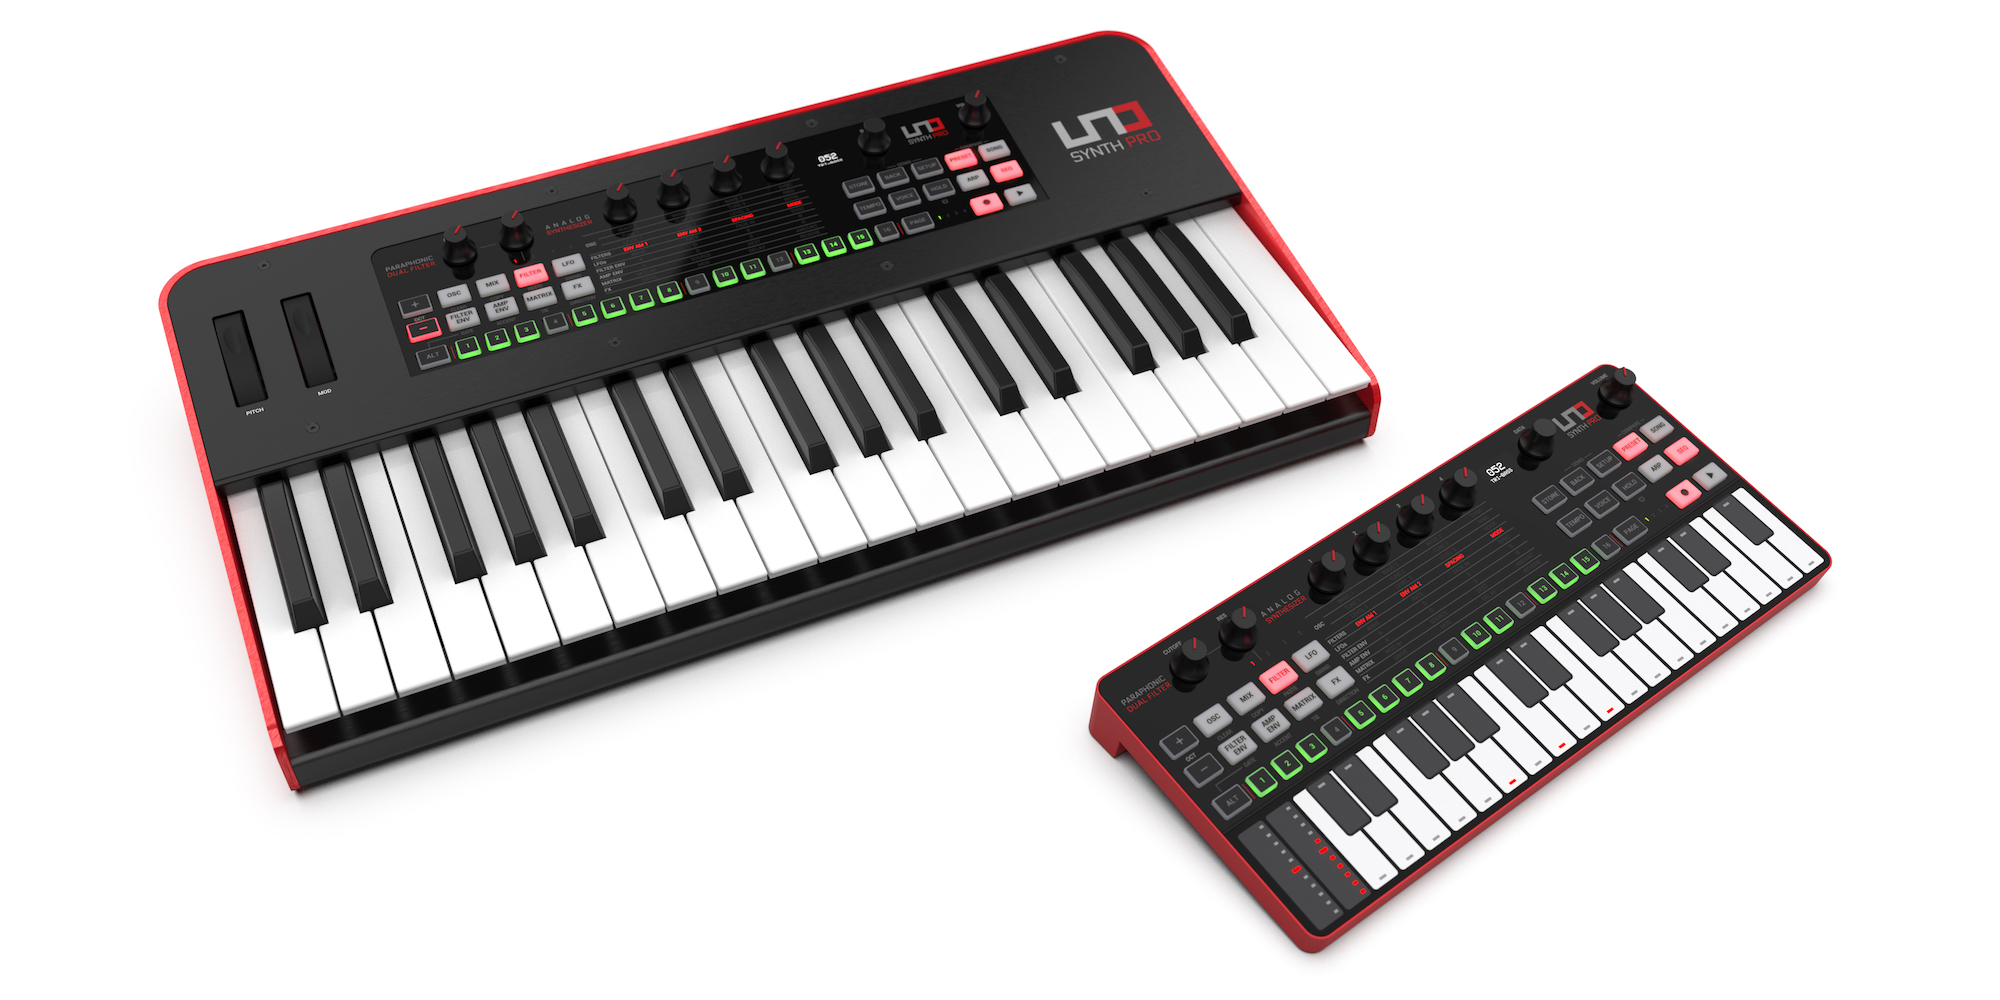 Mer information om "IK Multimedia announces UNO Synth Pro and UNO Synth Pro Desktop"